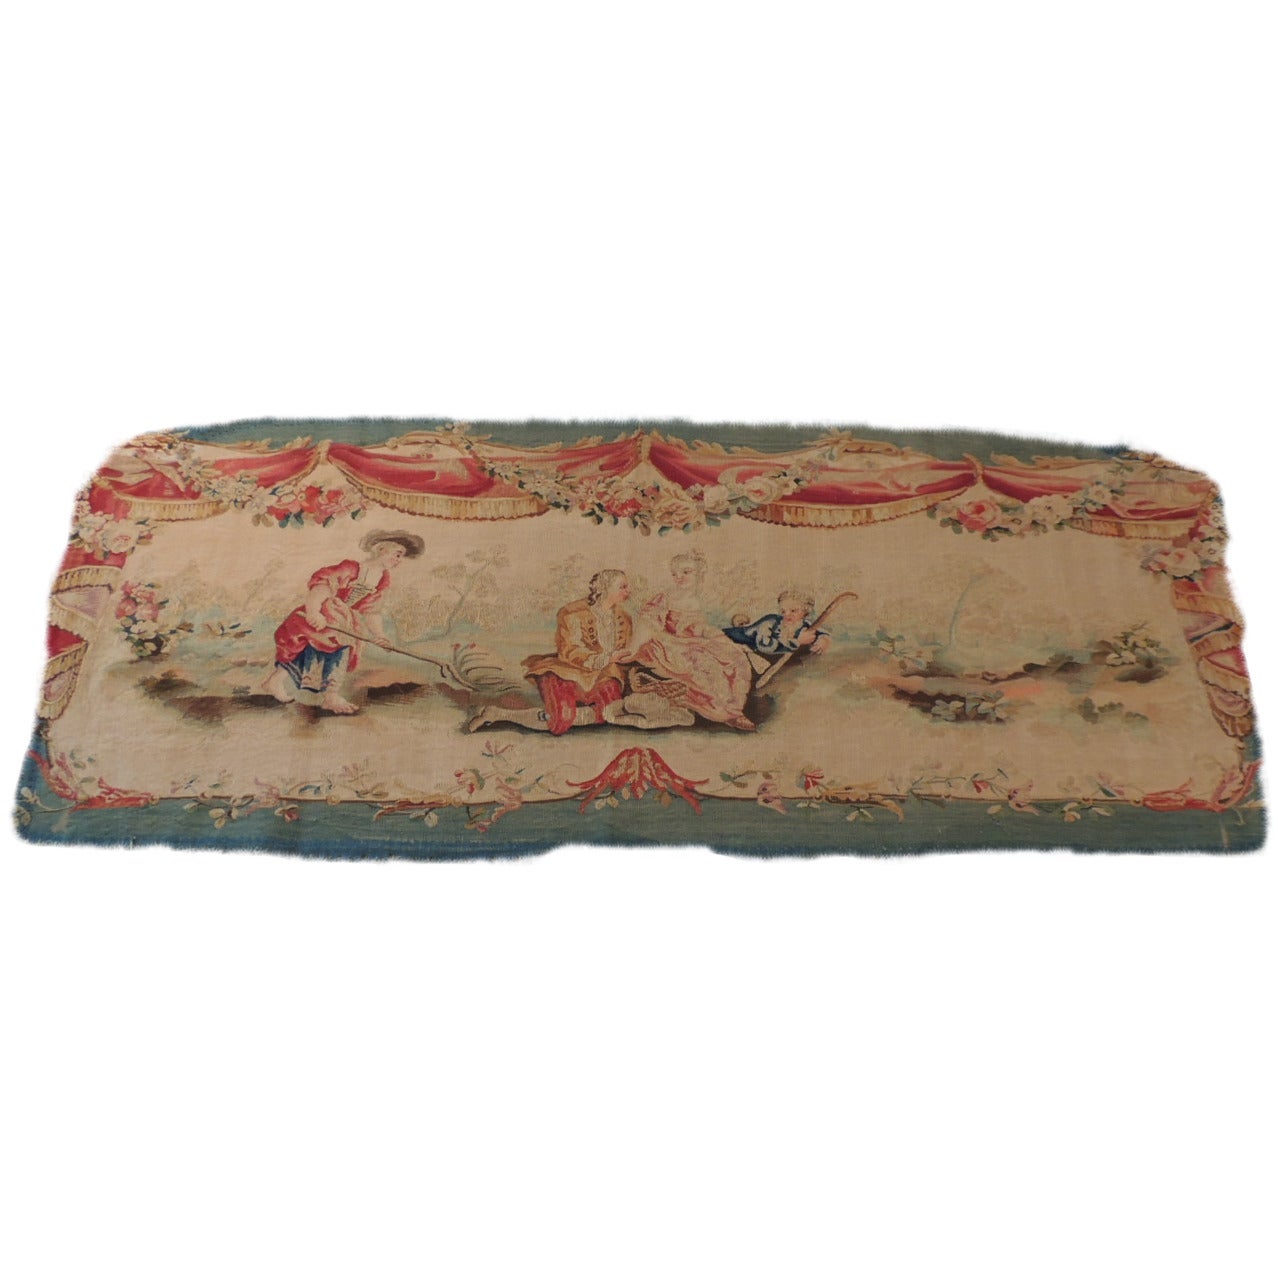 Aubusson Settee Tapestry Cover.